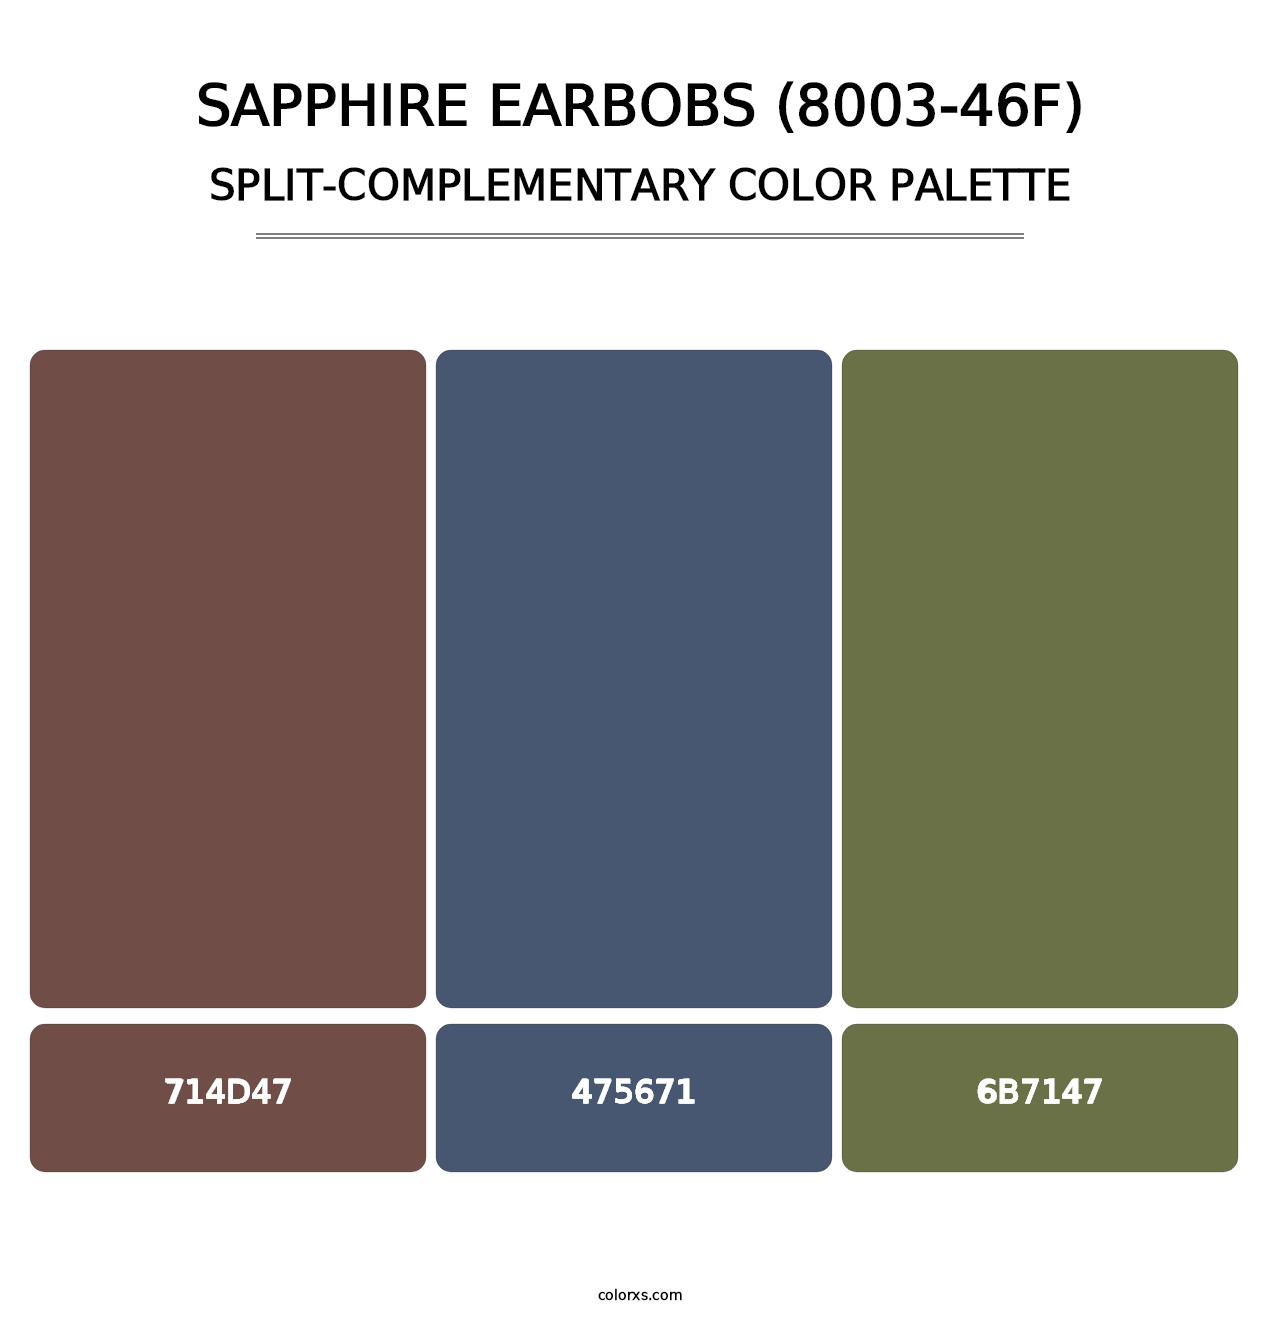 Sapphire Earbobs (8003-46F) - Split-Complementary Color Palette